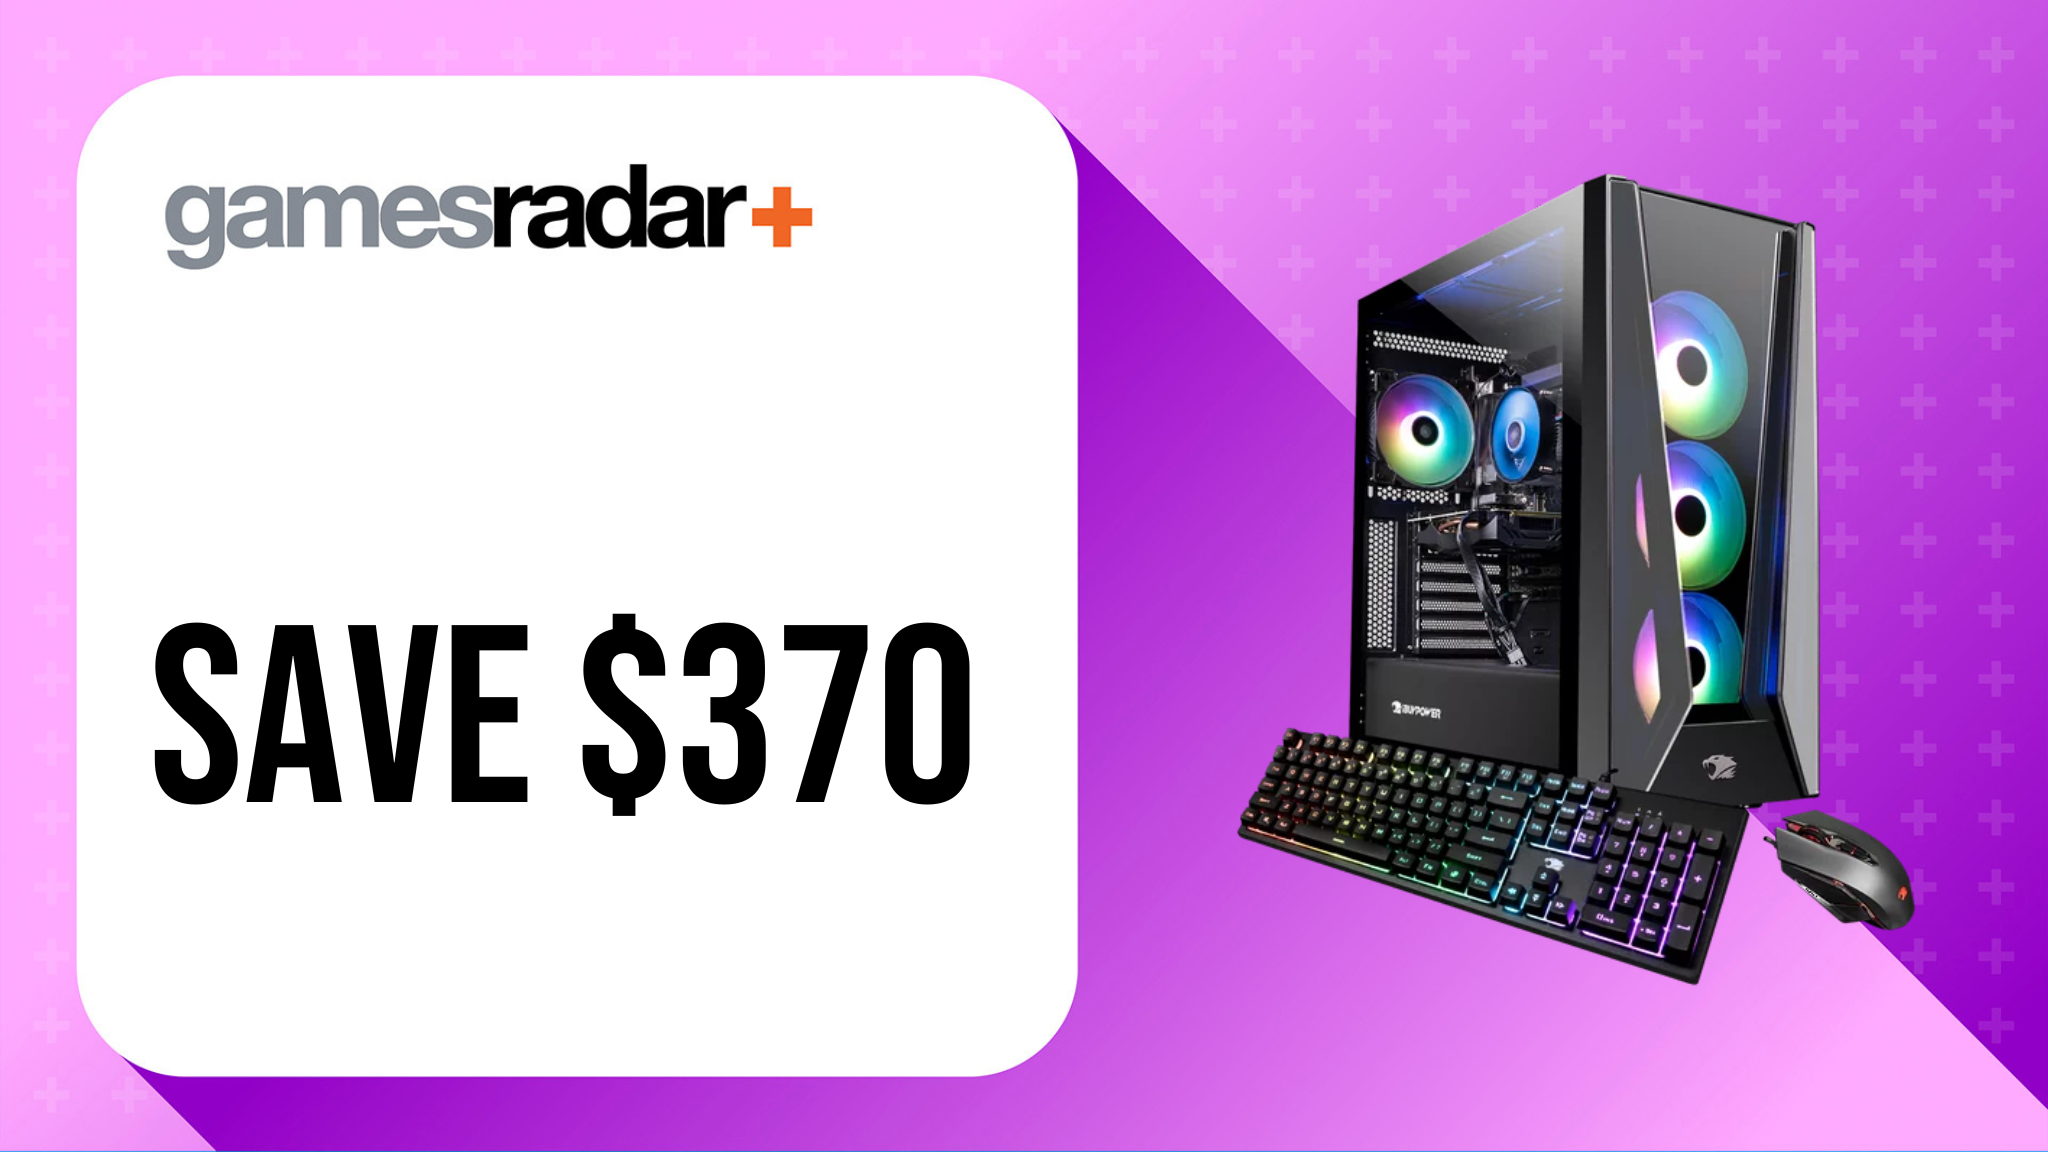 iBUYPOWER Slate Deal image with $370 savings stamp